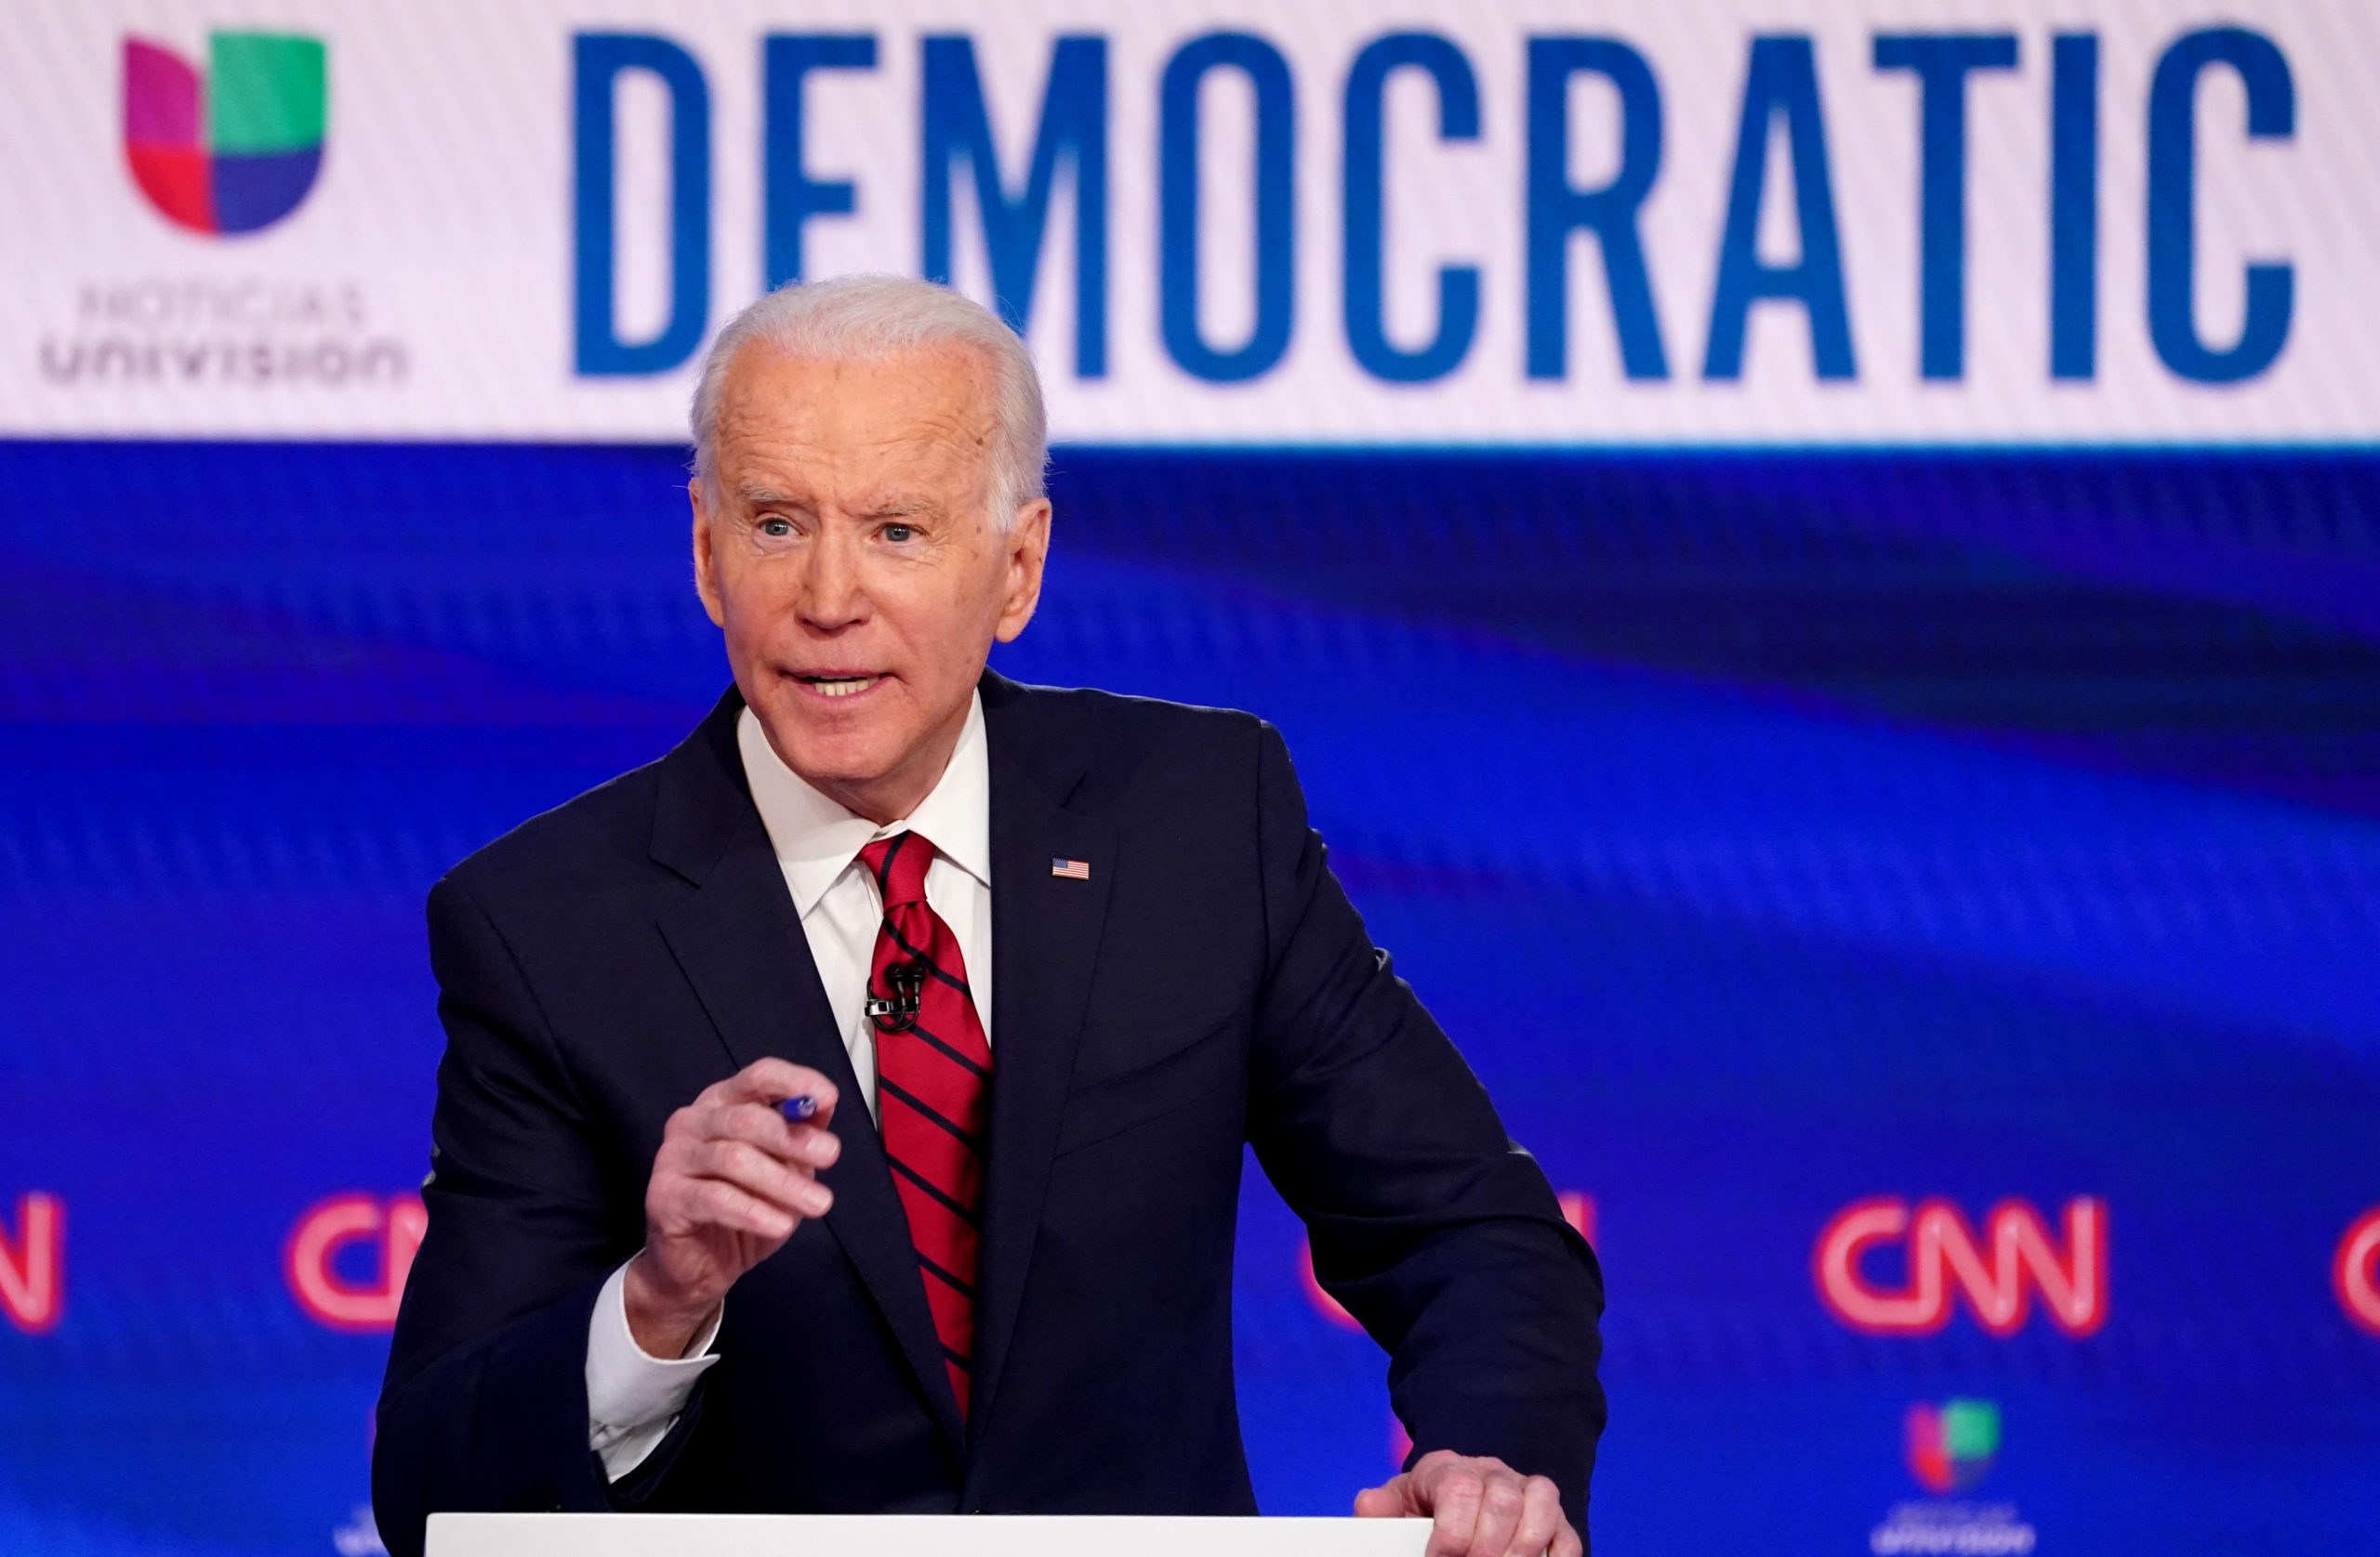 Biden Mocks Trump's Infamous Ramp Walk. Asks Voters to Compare Their Health.